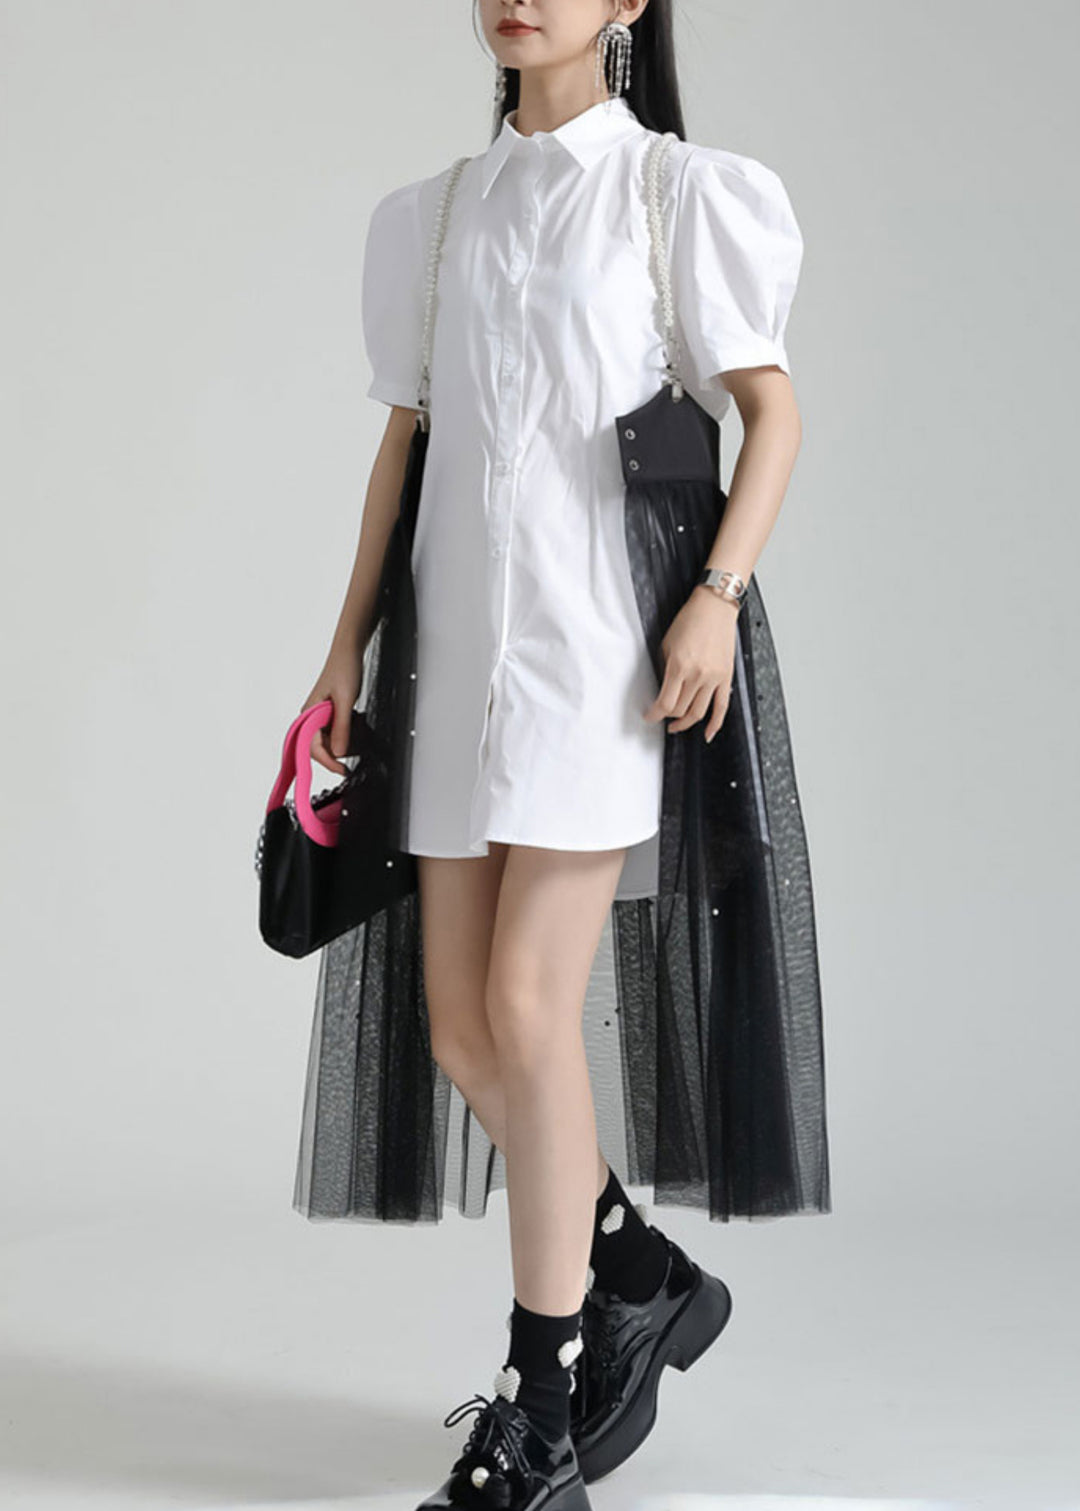 French White Peter Pan Collar Shirt Dresses And Tulle Skirt Two Pieces Set Summer